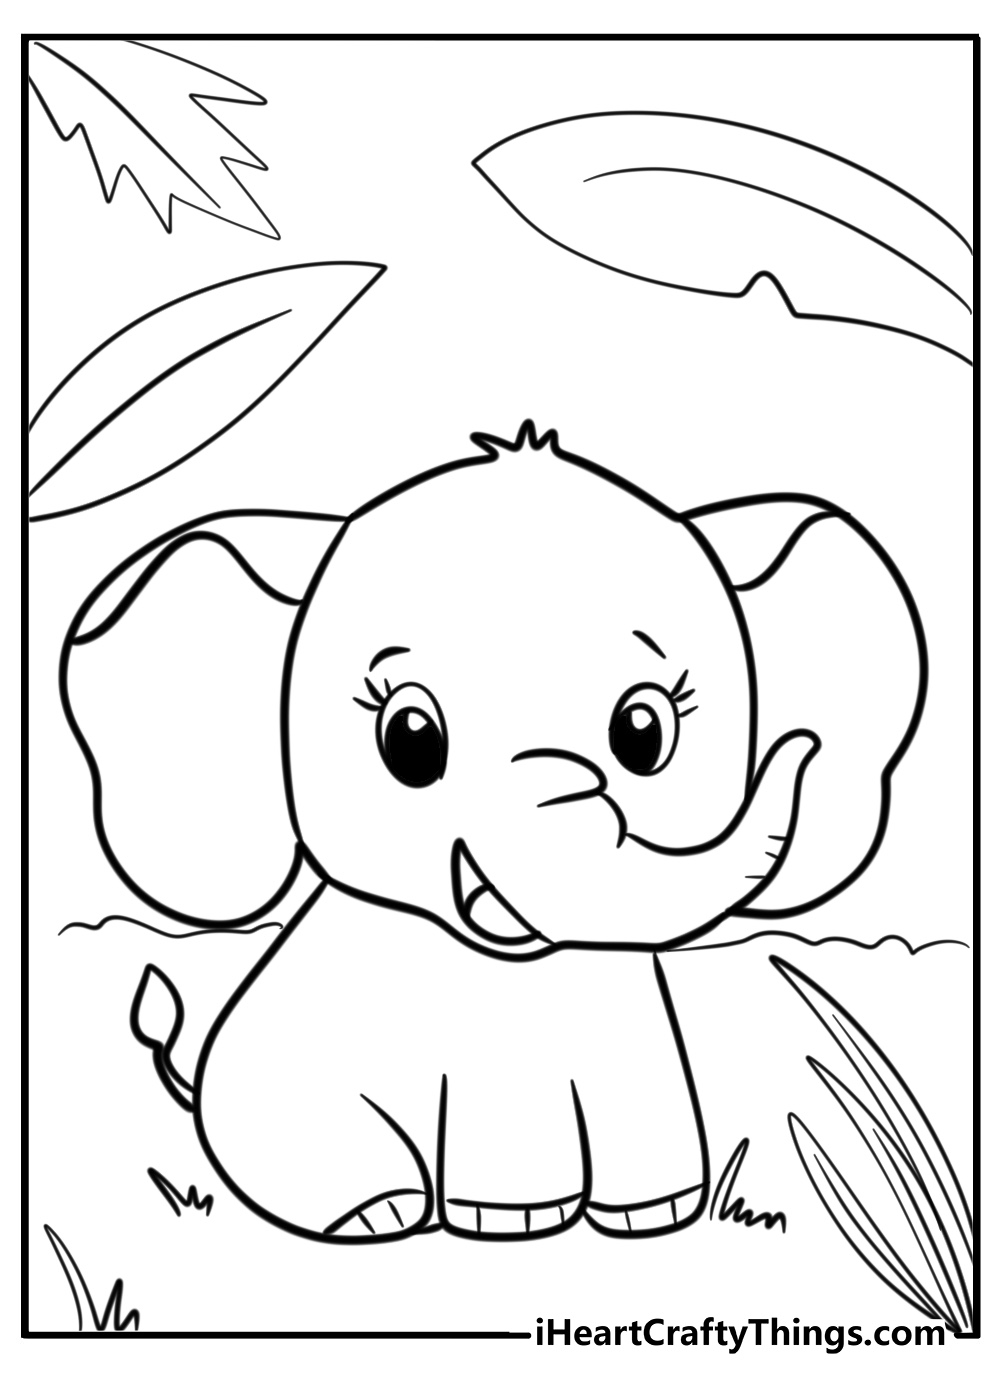 Cute animals coloring page of blushing elephant outline for kids